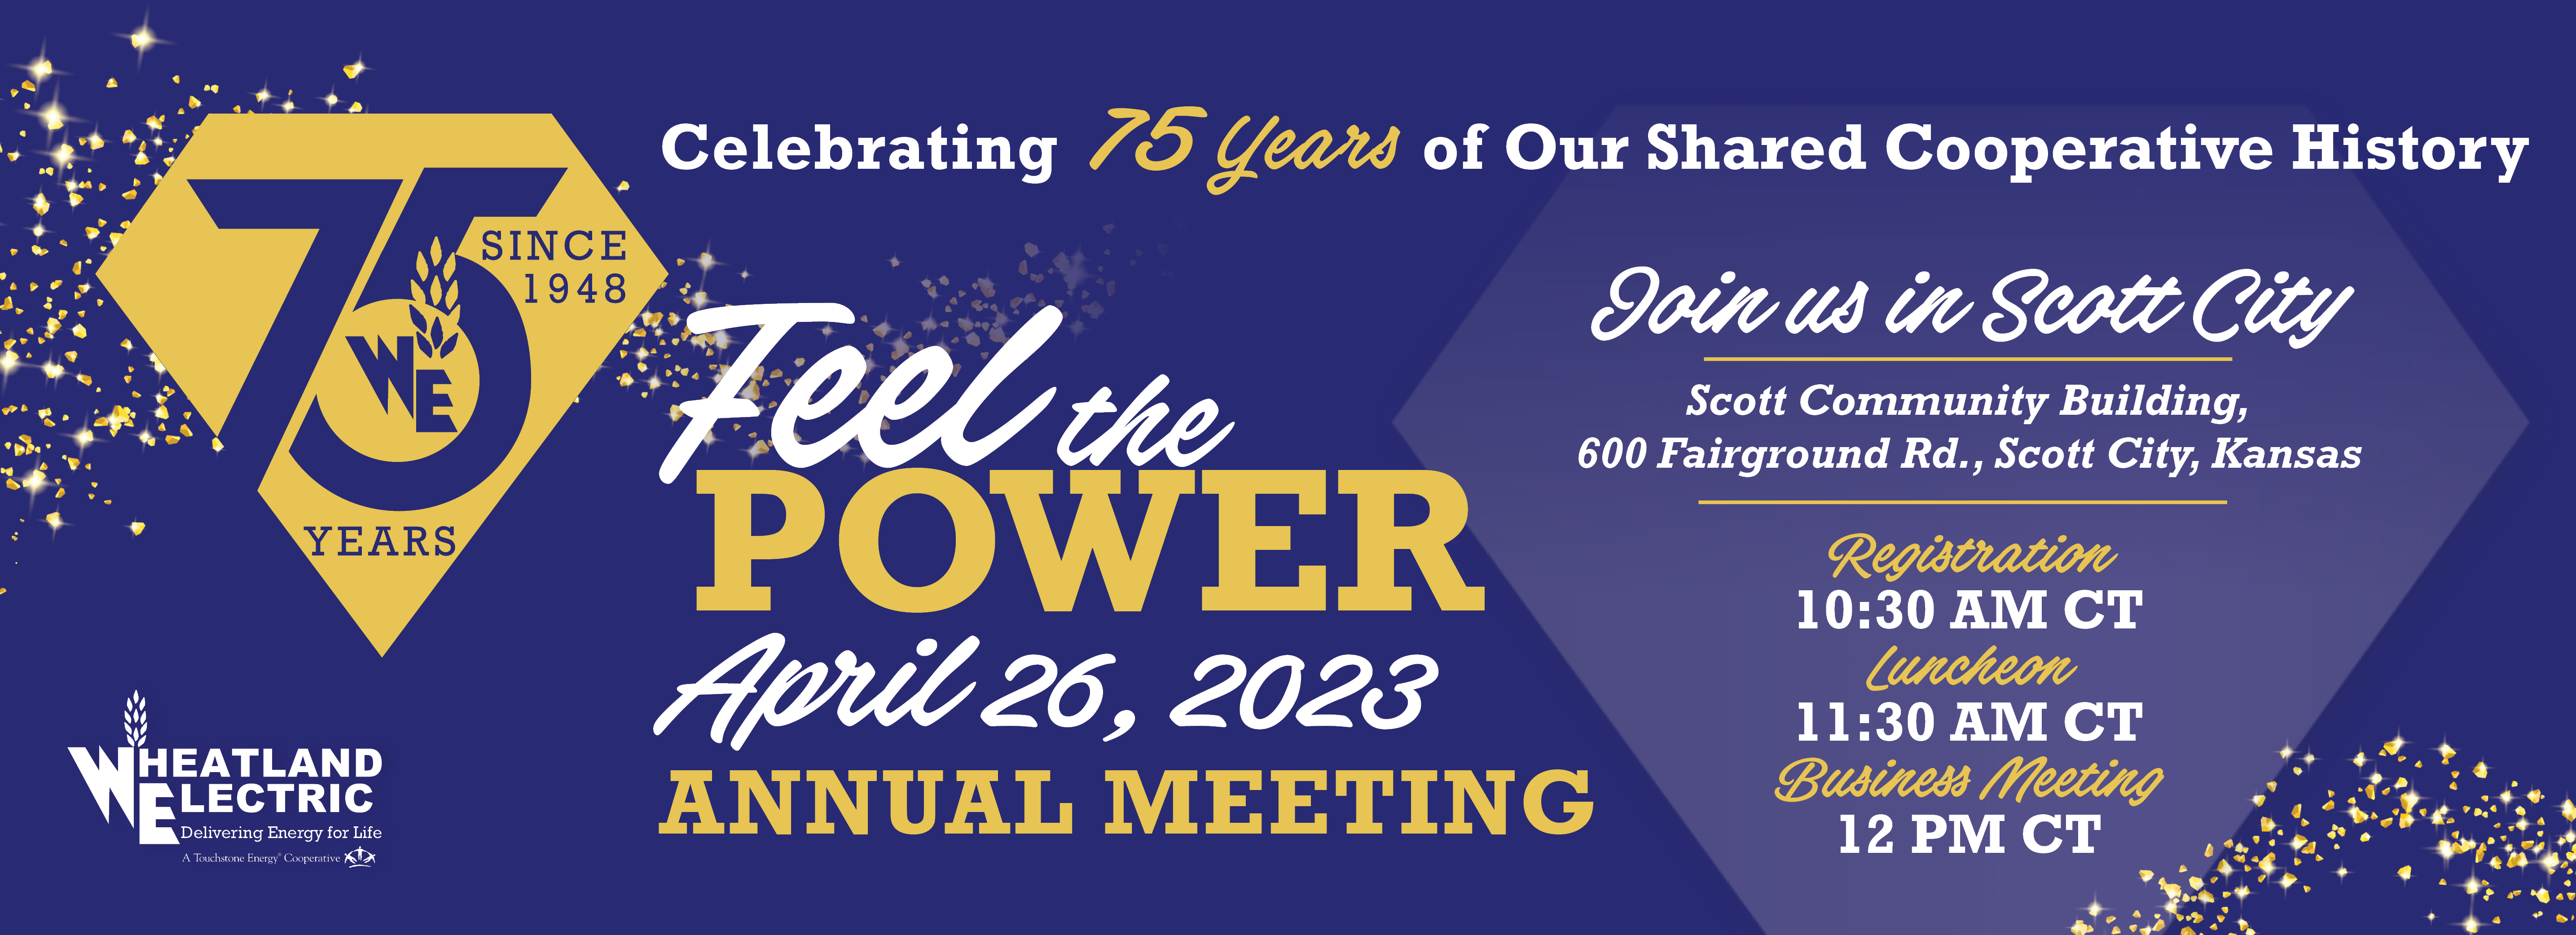 Join us April 26, 2023 for our Annual Meeting